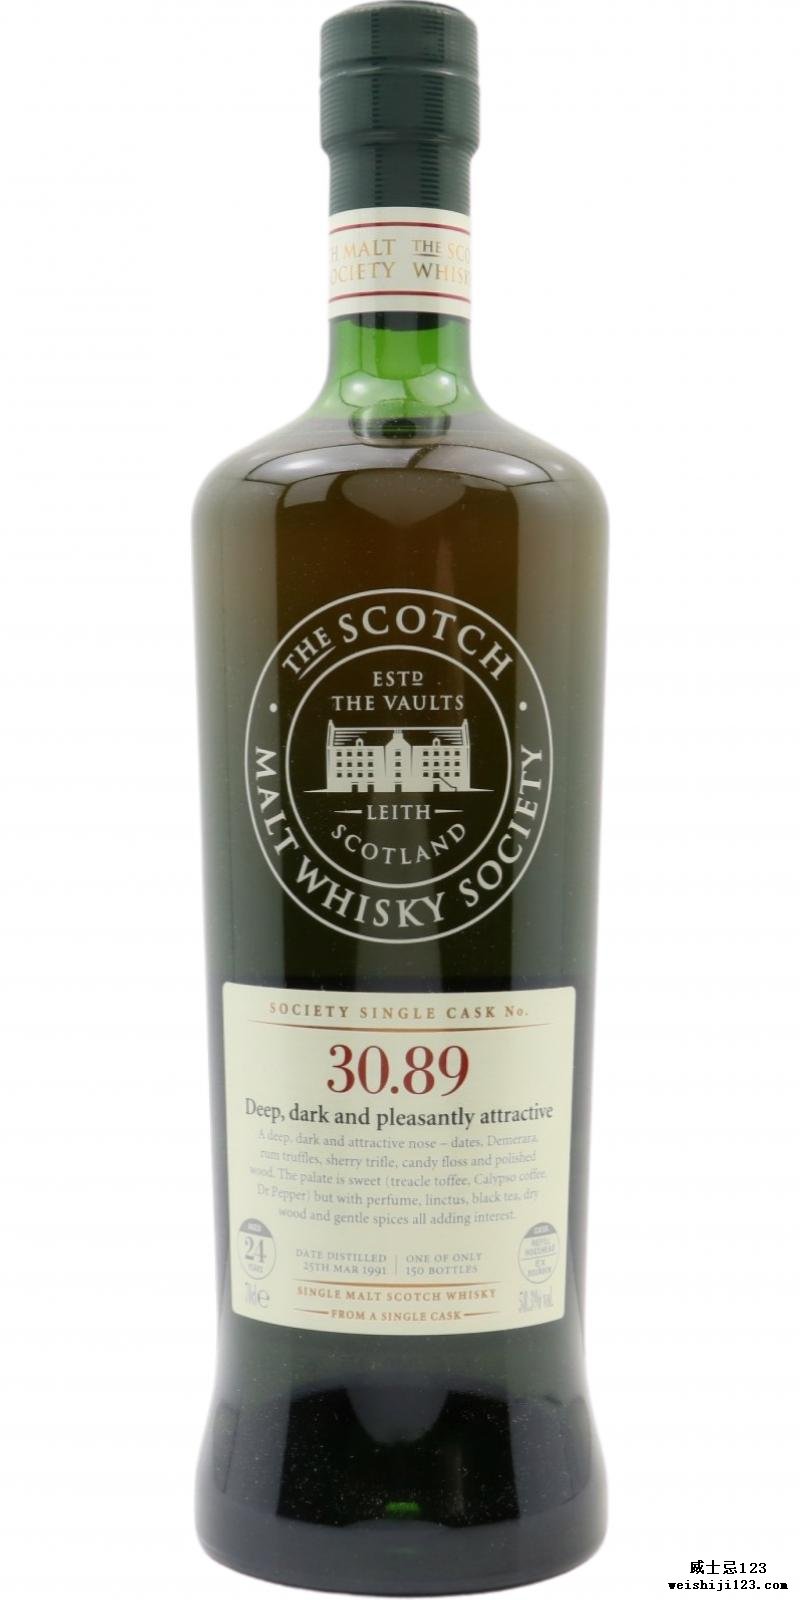 Glenrothes 1991 SMWS 30.89